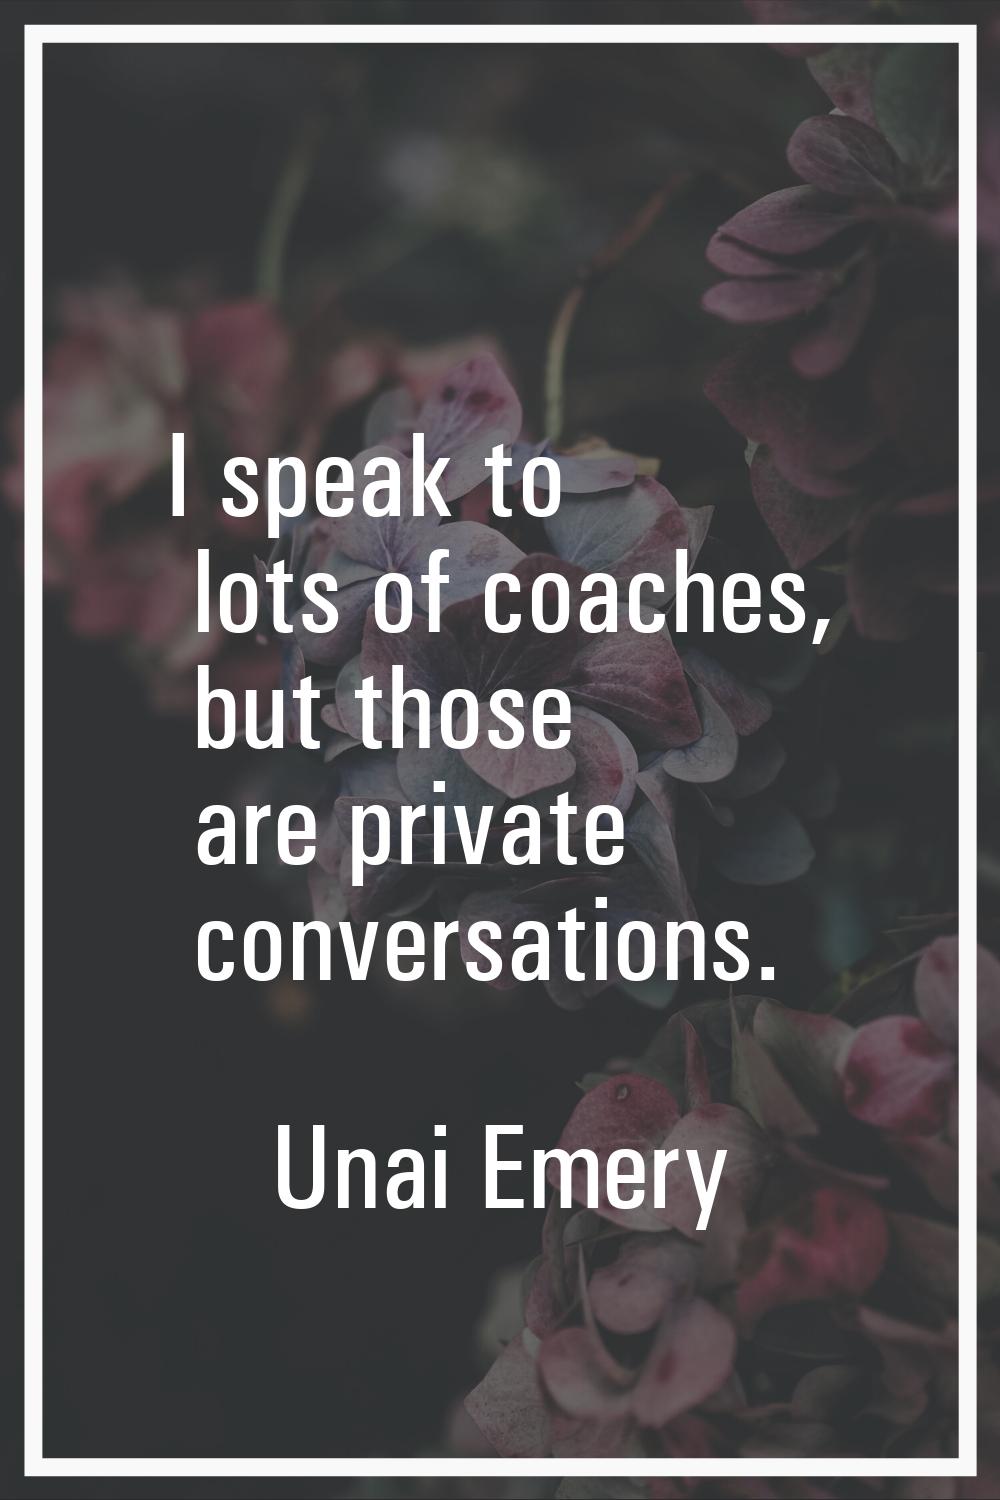 I speak to lots of coaches, but those are private conversations.